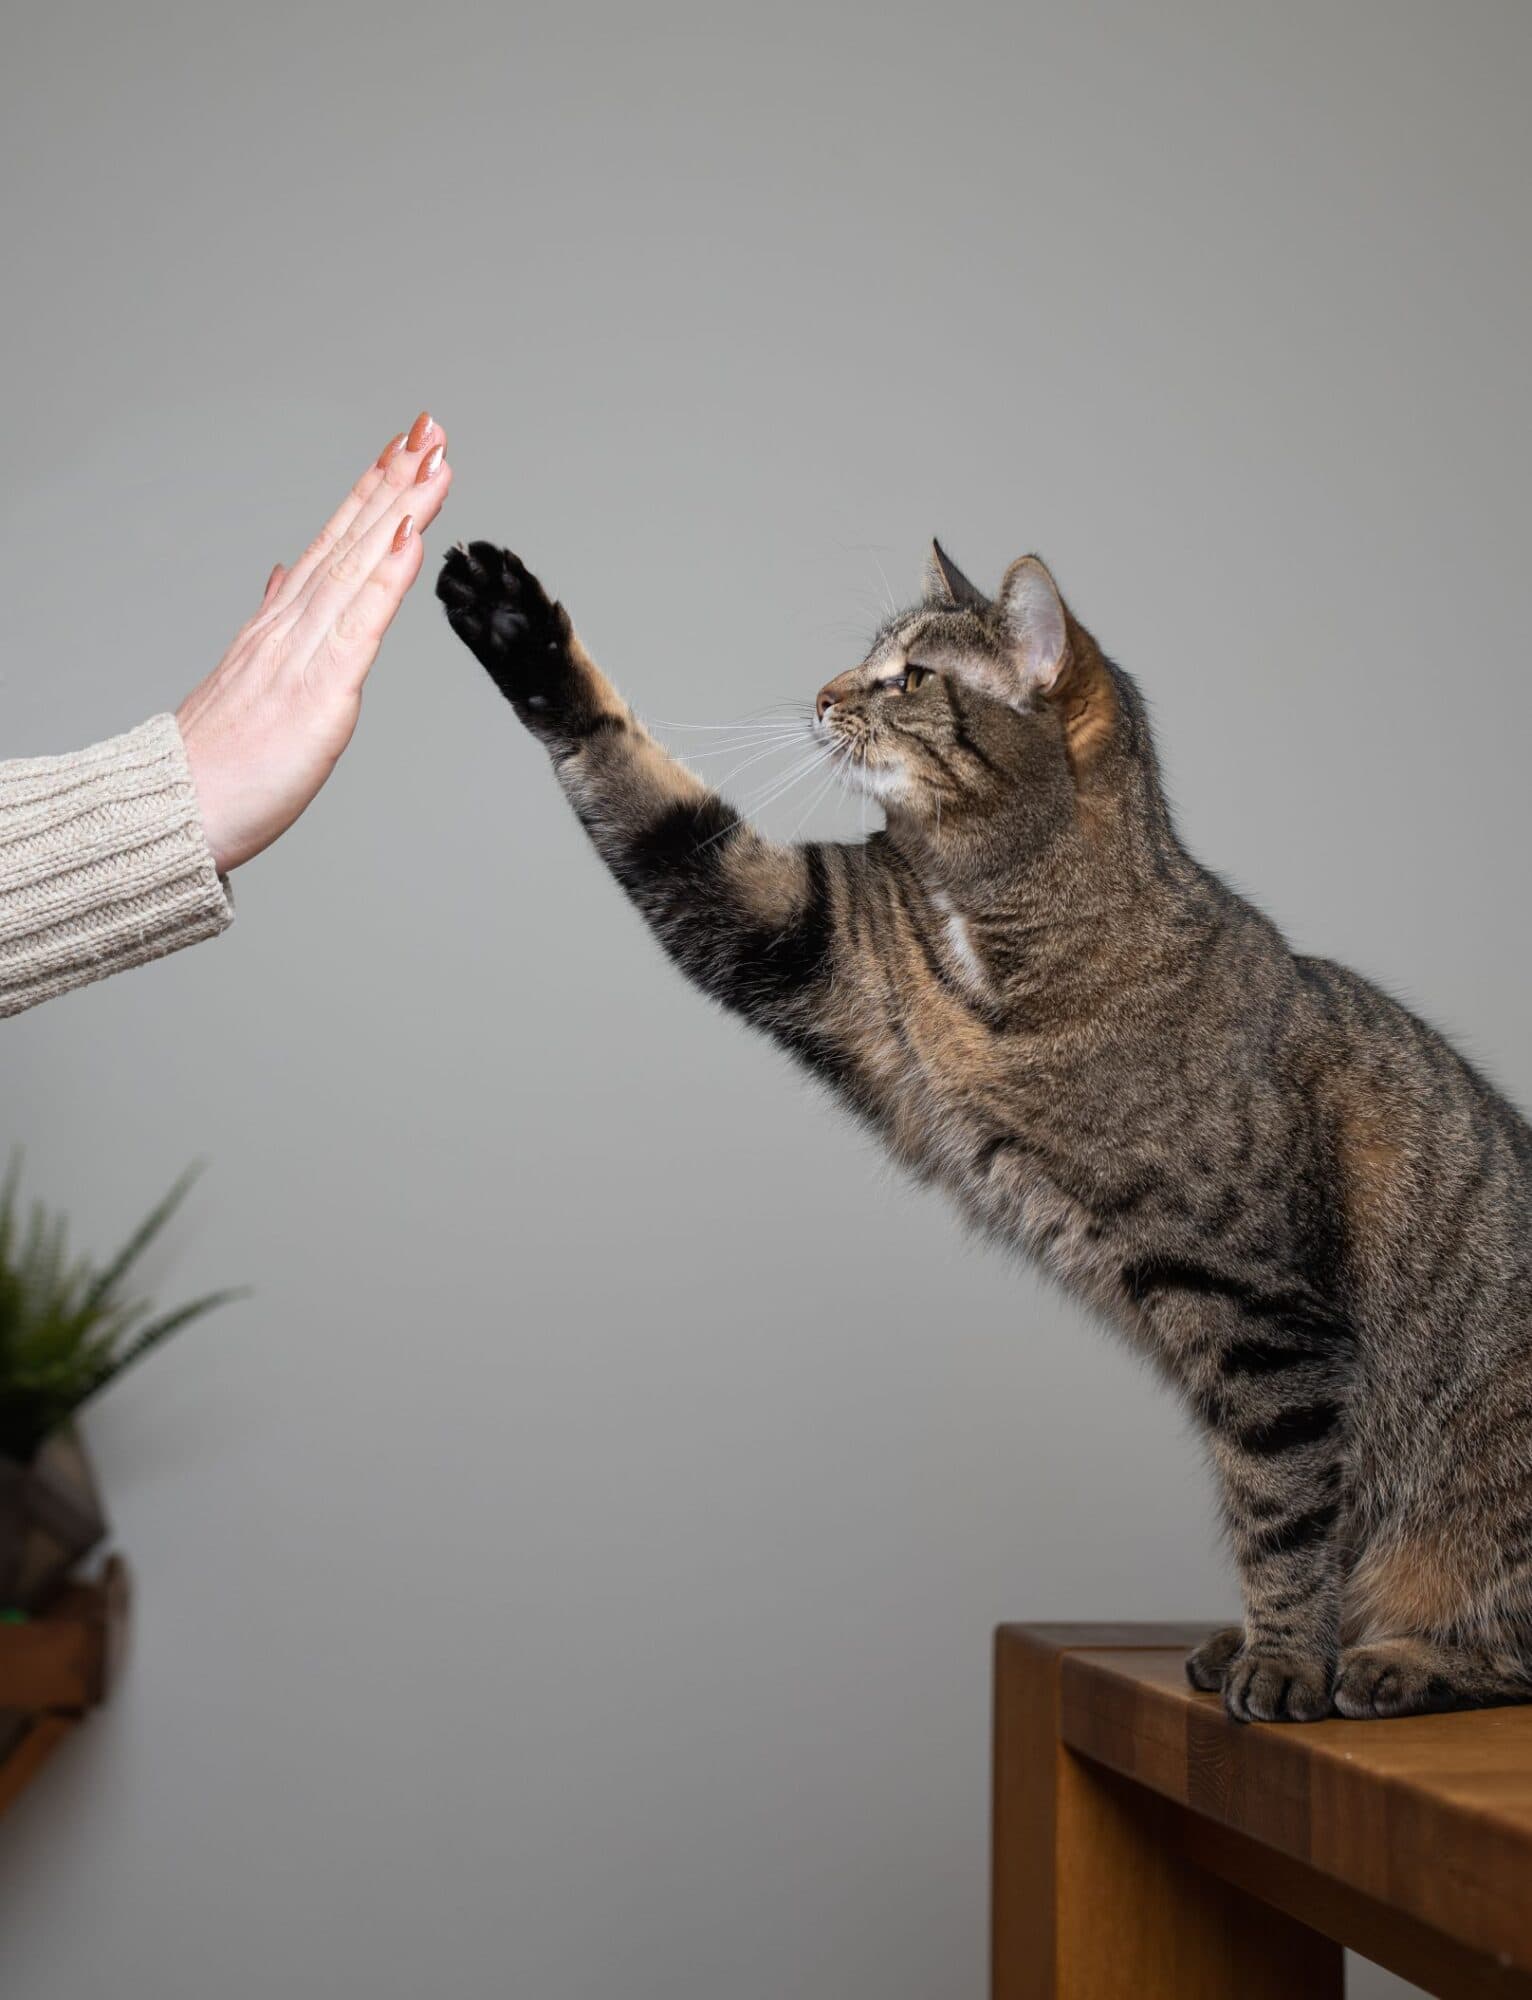 A gray tabby cat gives her human a high-five.